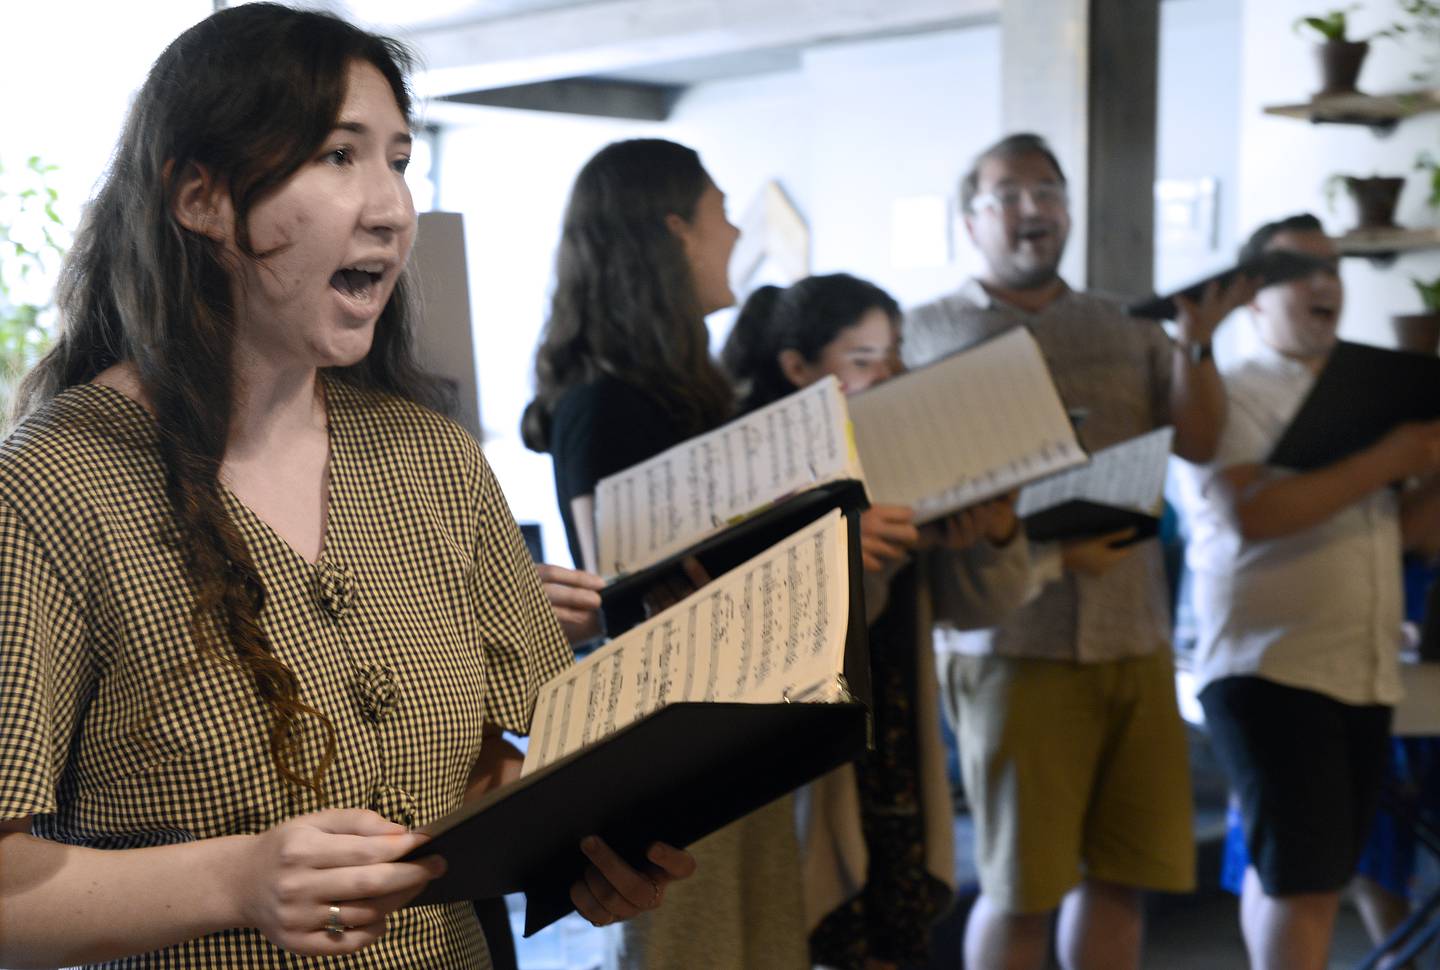 Natalie Mustea (foreground) sings "Bridge Over Troubled Water" along with her fellow choral members during a special coffeehouse concert Wednesday, June 22, 2022, at More On Main in Streator as part of the Poco a Poco Festival.